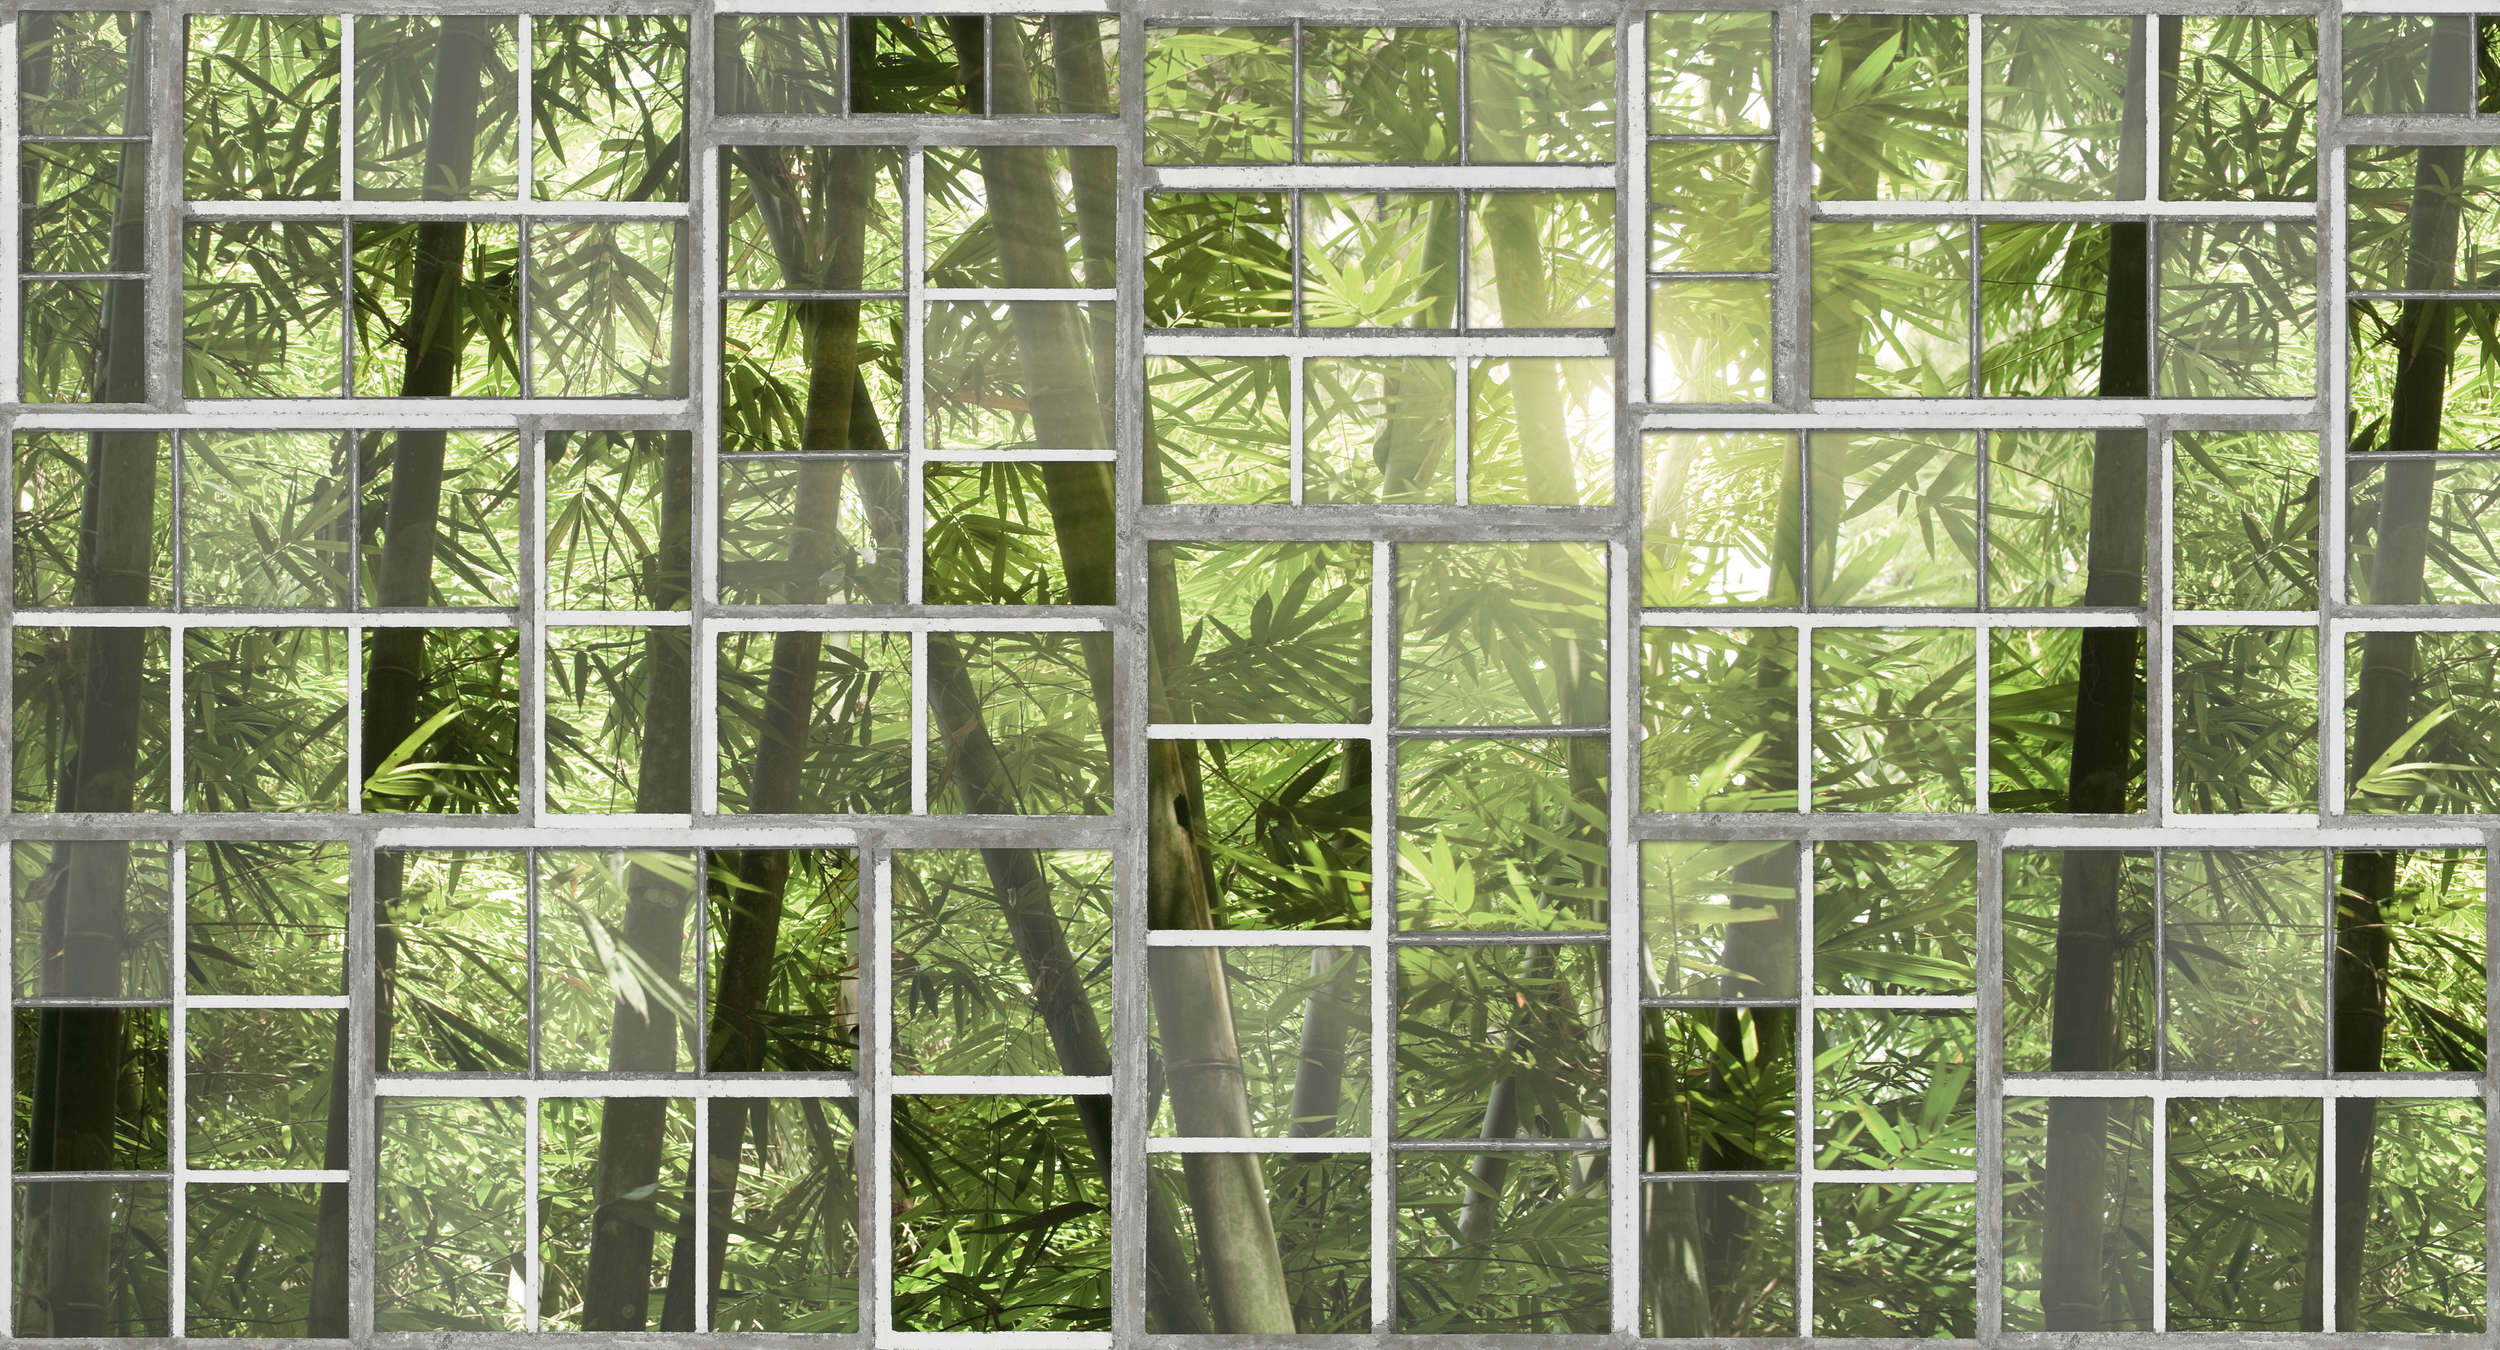             Photo wallpaper window with jungle view, retro look - green, grey, white
        